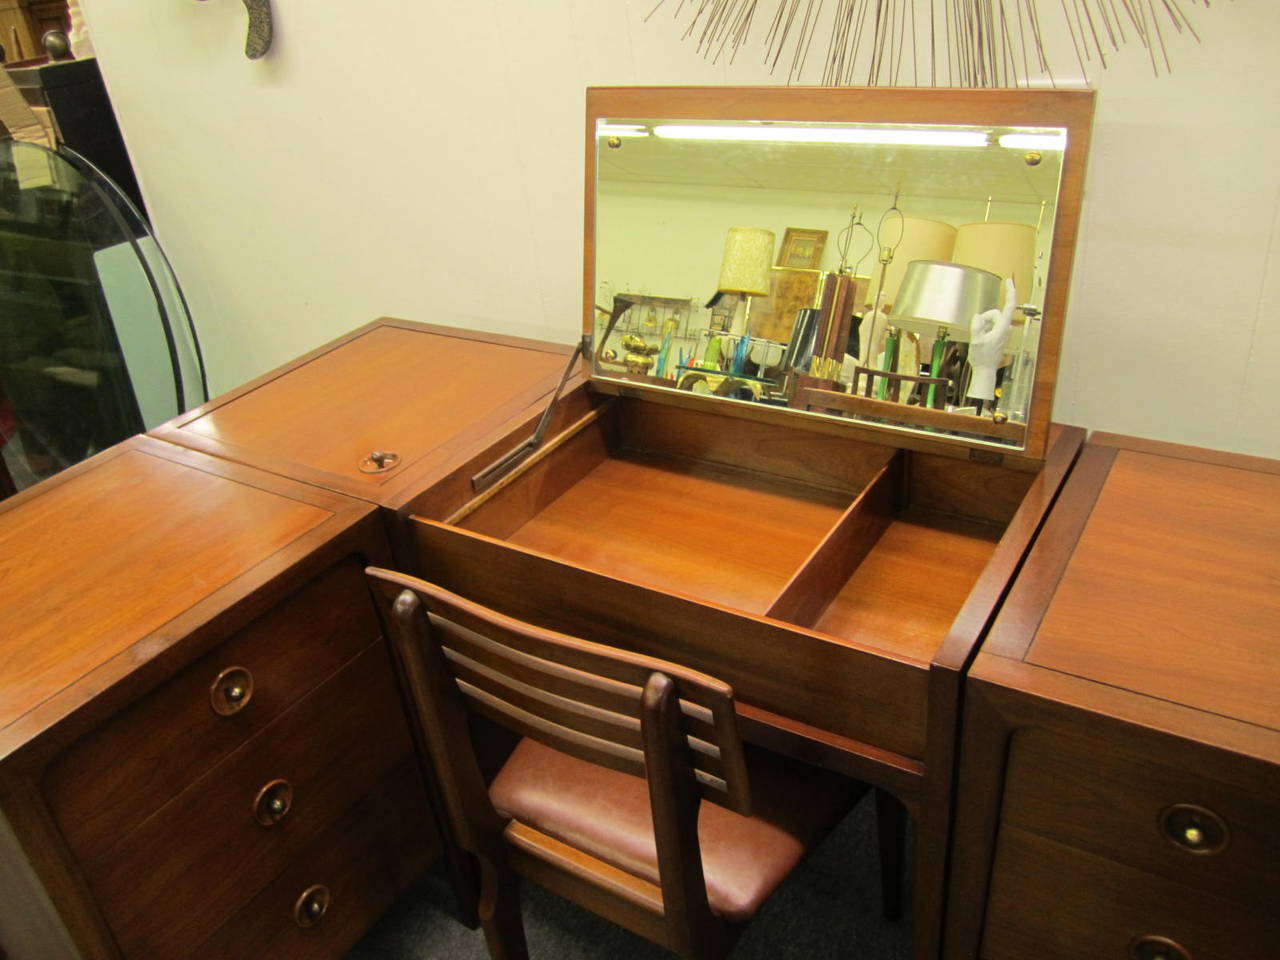 Extremely rare five-piece set of John Van Koert's Drexel Counterpoint modular desk and chair plus two separate drawer units and a fabulous cedar lined hamper. Handsome in every way with a flip up mirrored desk/vanity and matching desk chair. This